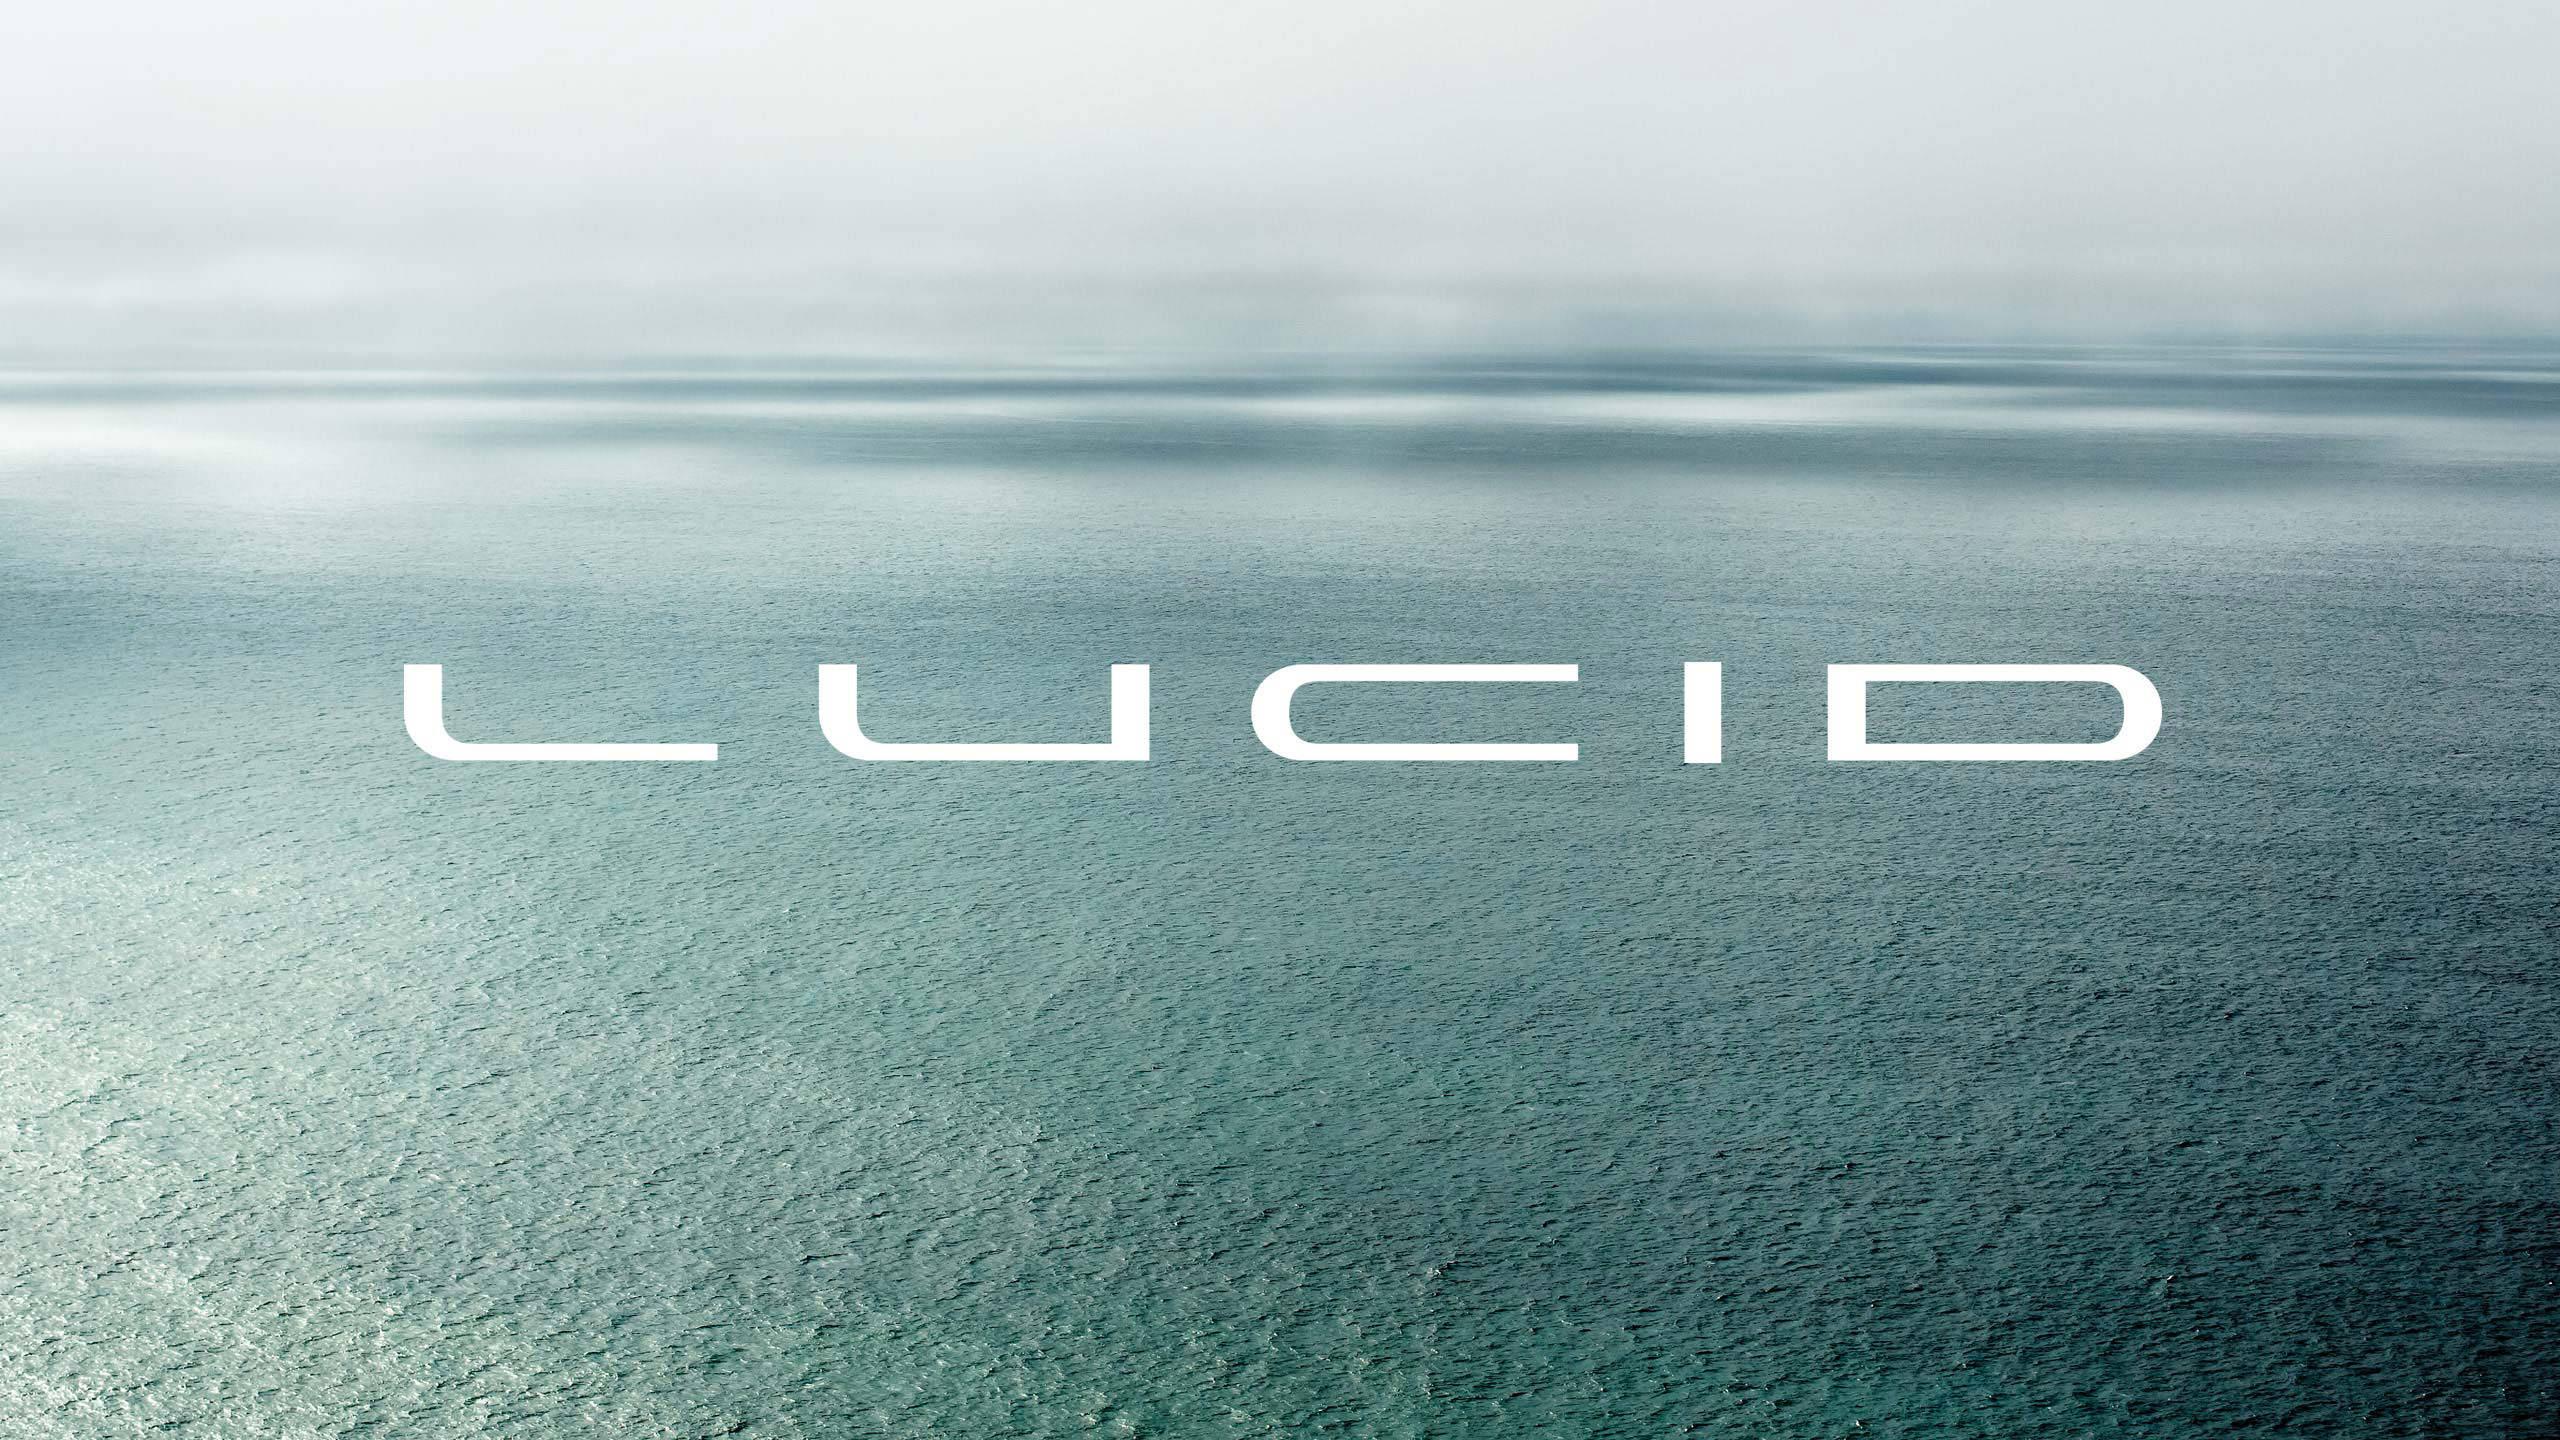 Tolleson Logo - Building the Lucid Motors Brand